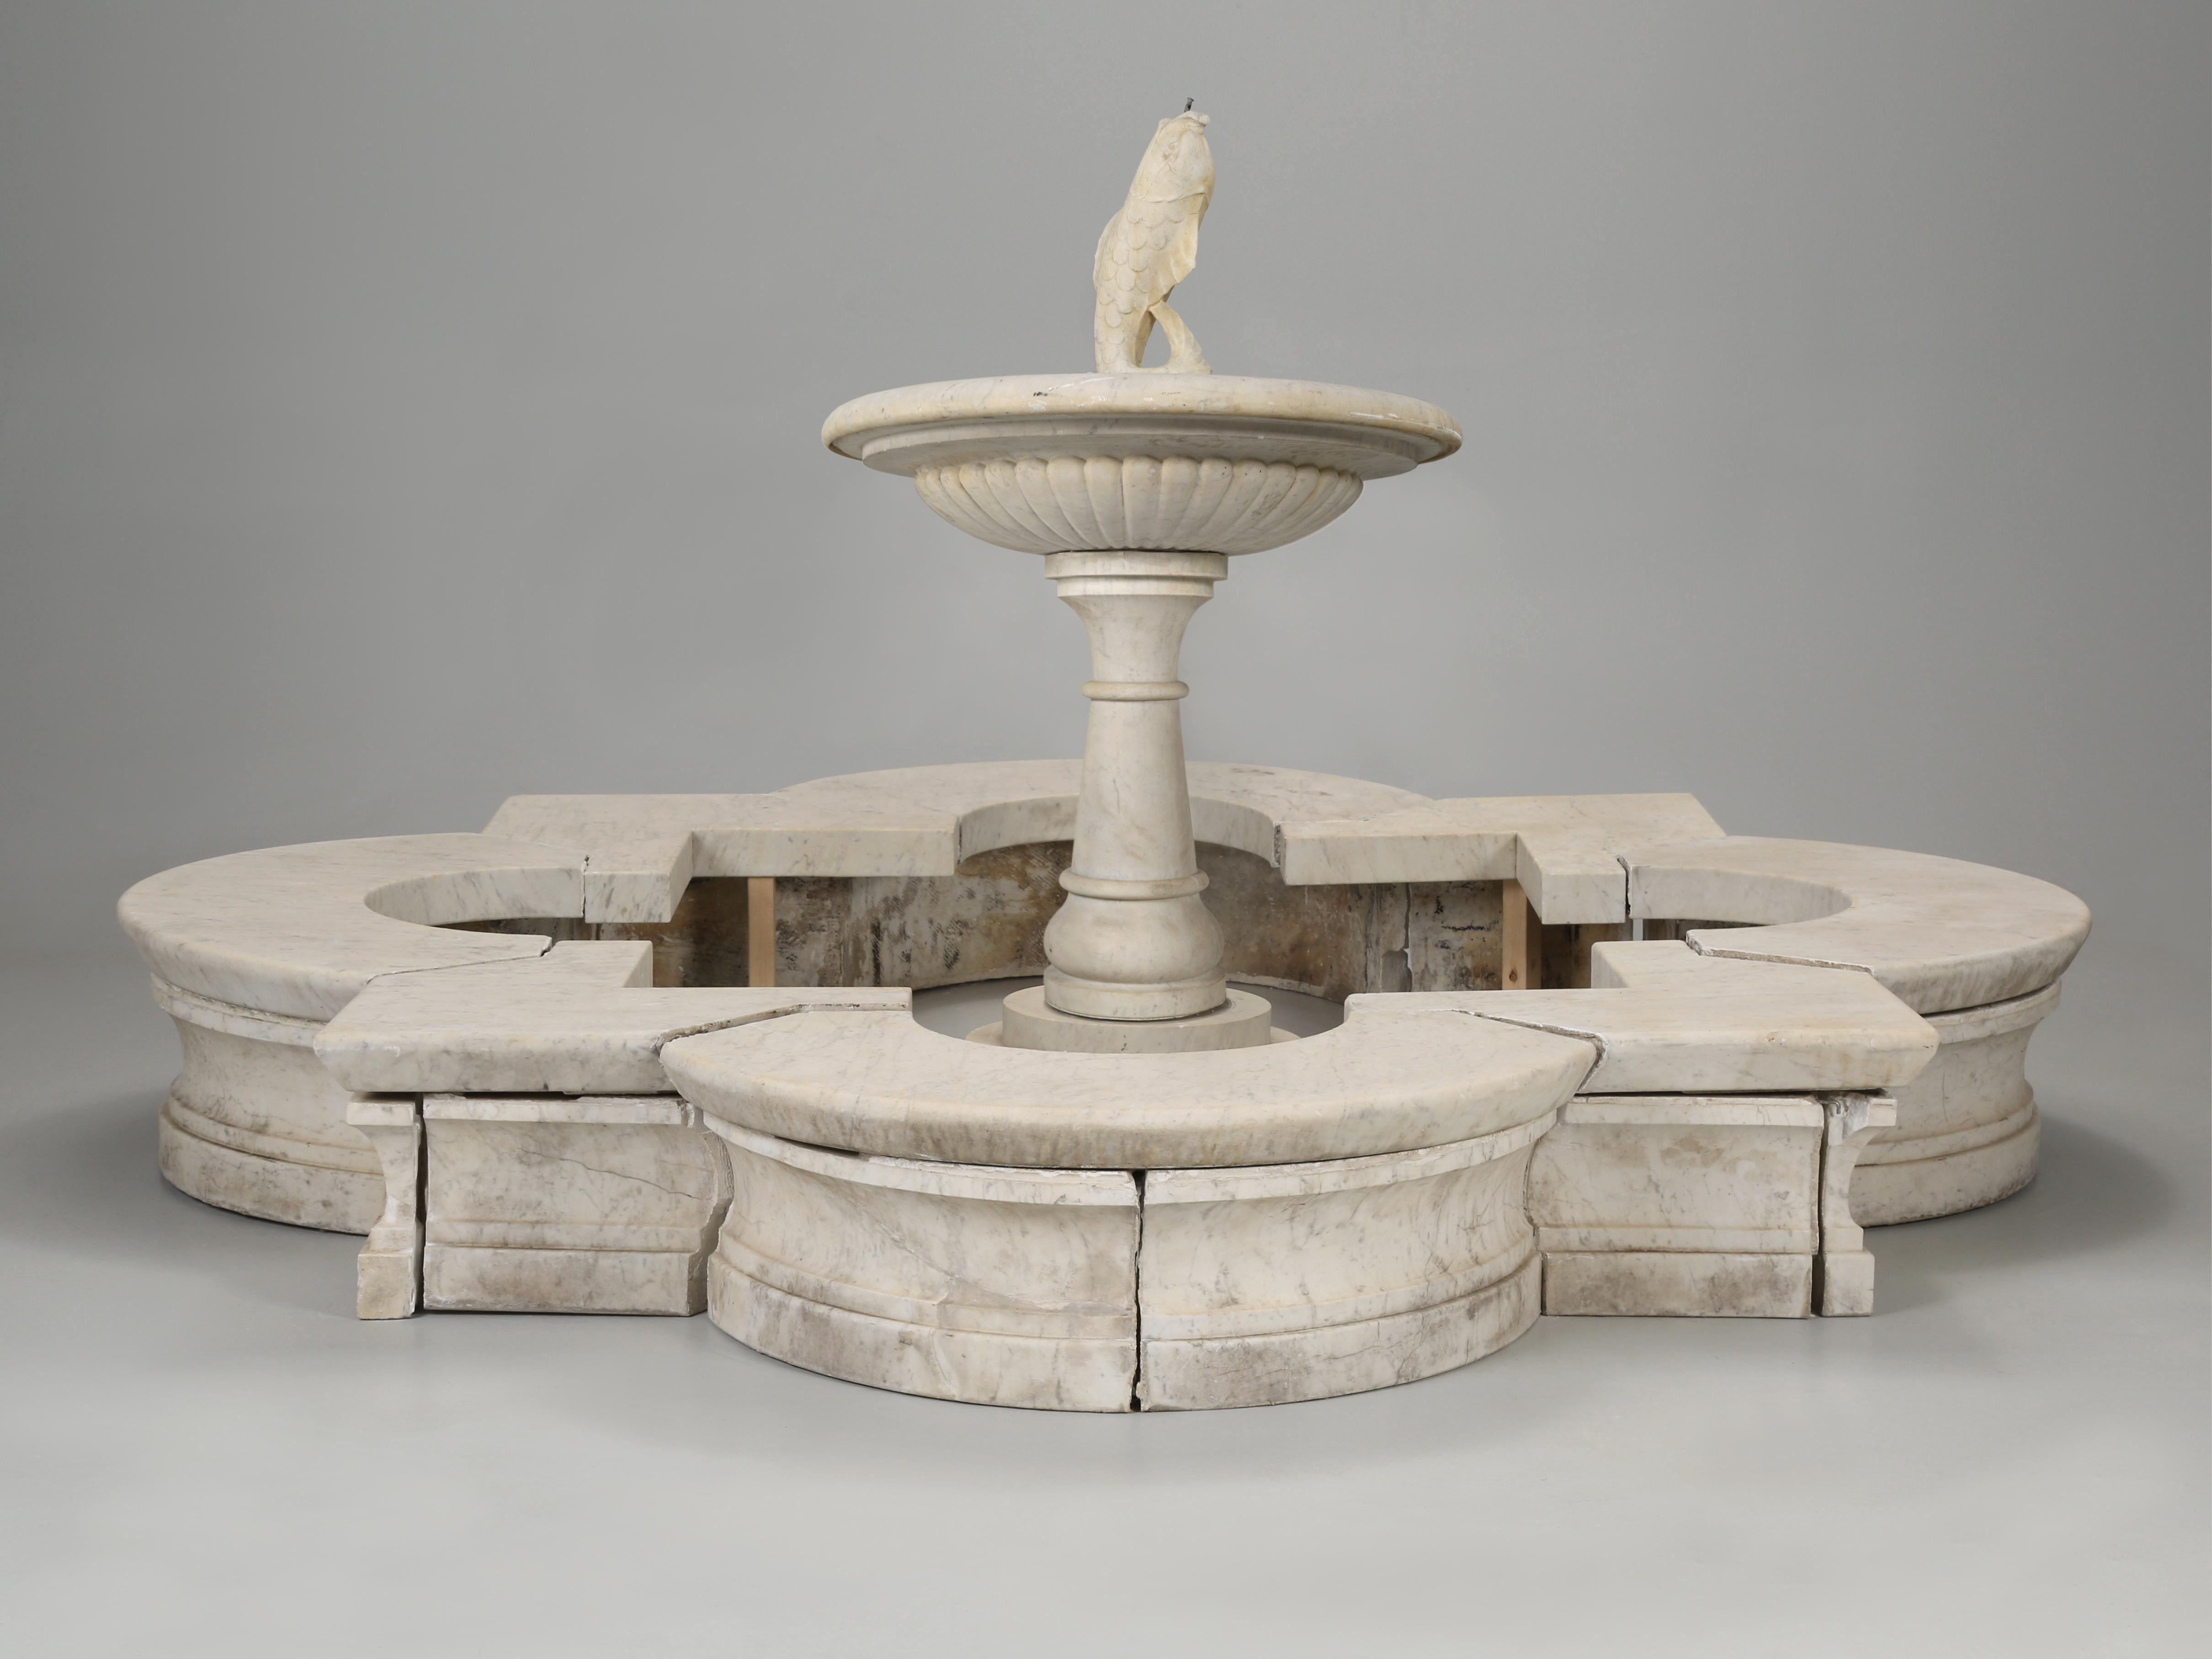 Exquisite and rare Antique Italian Hand-Carved Marble Fountain with a Classic Quatrefoil Basin and Fish Spout, that was removed from a Chicago mansion. The quatrefoil design dates back to 850BC and means four leaves and is a symbol for good luck. We